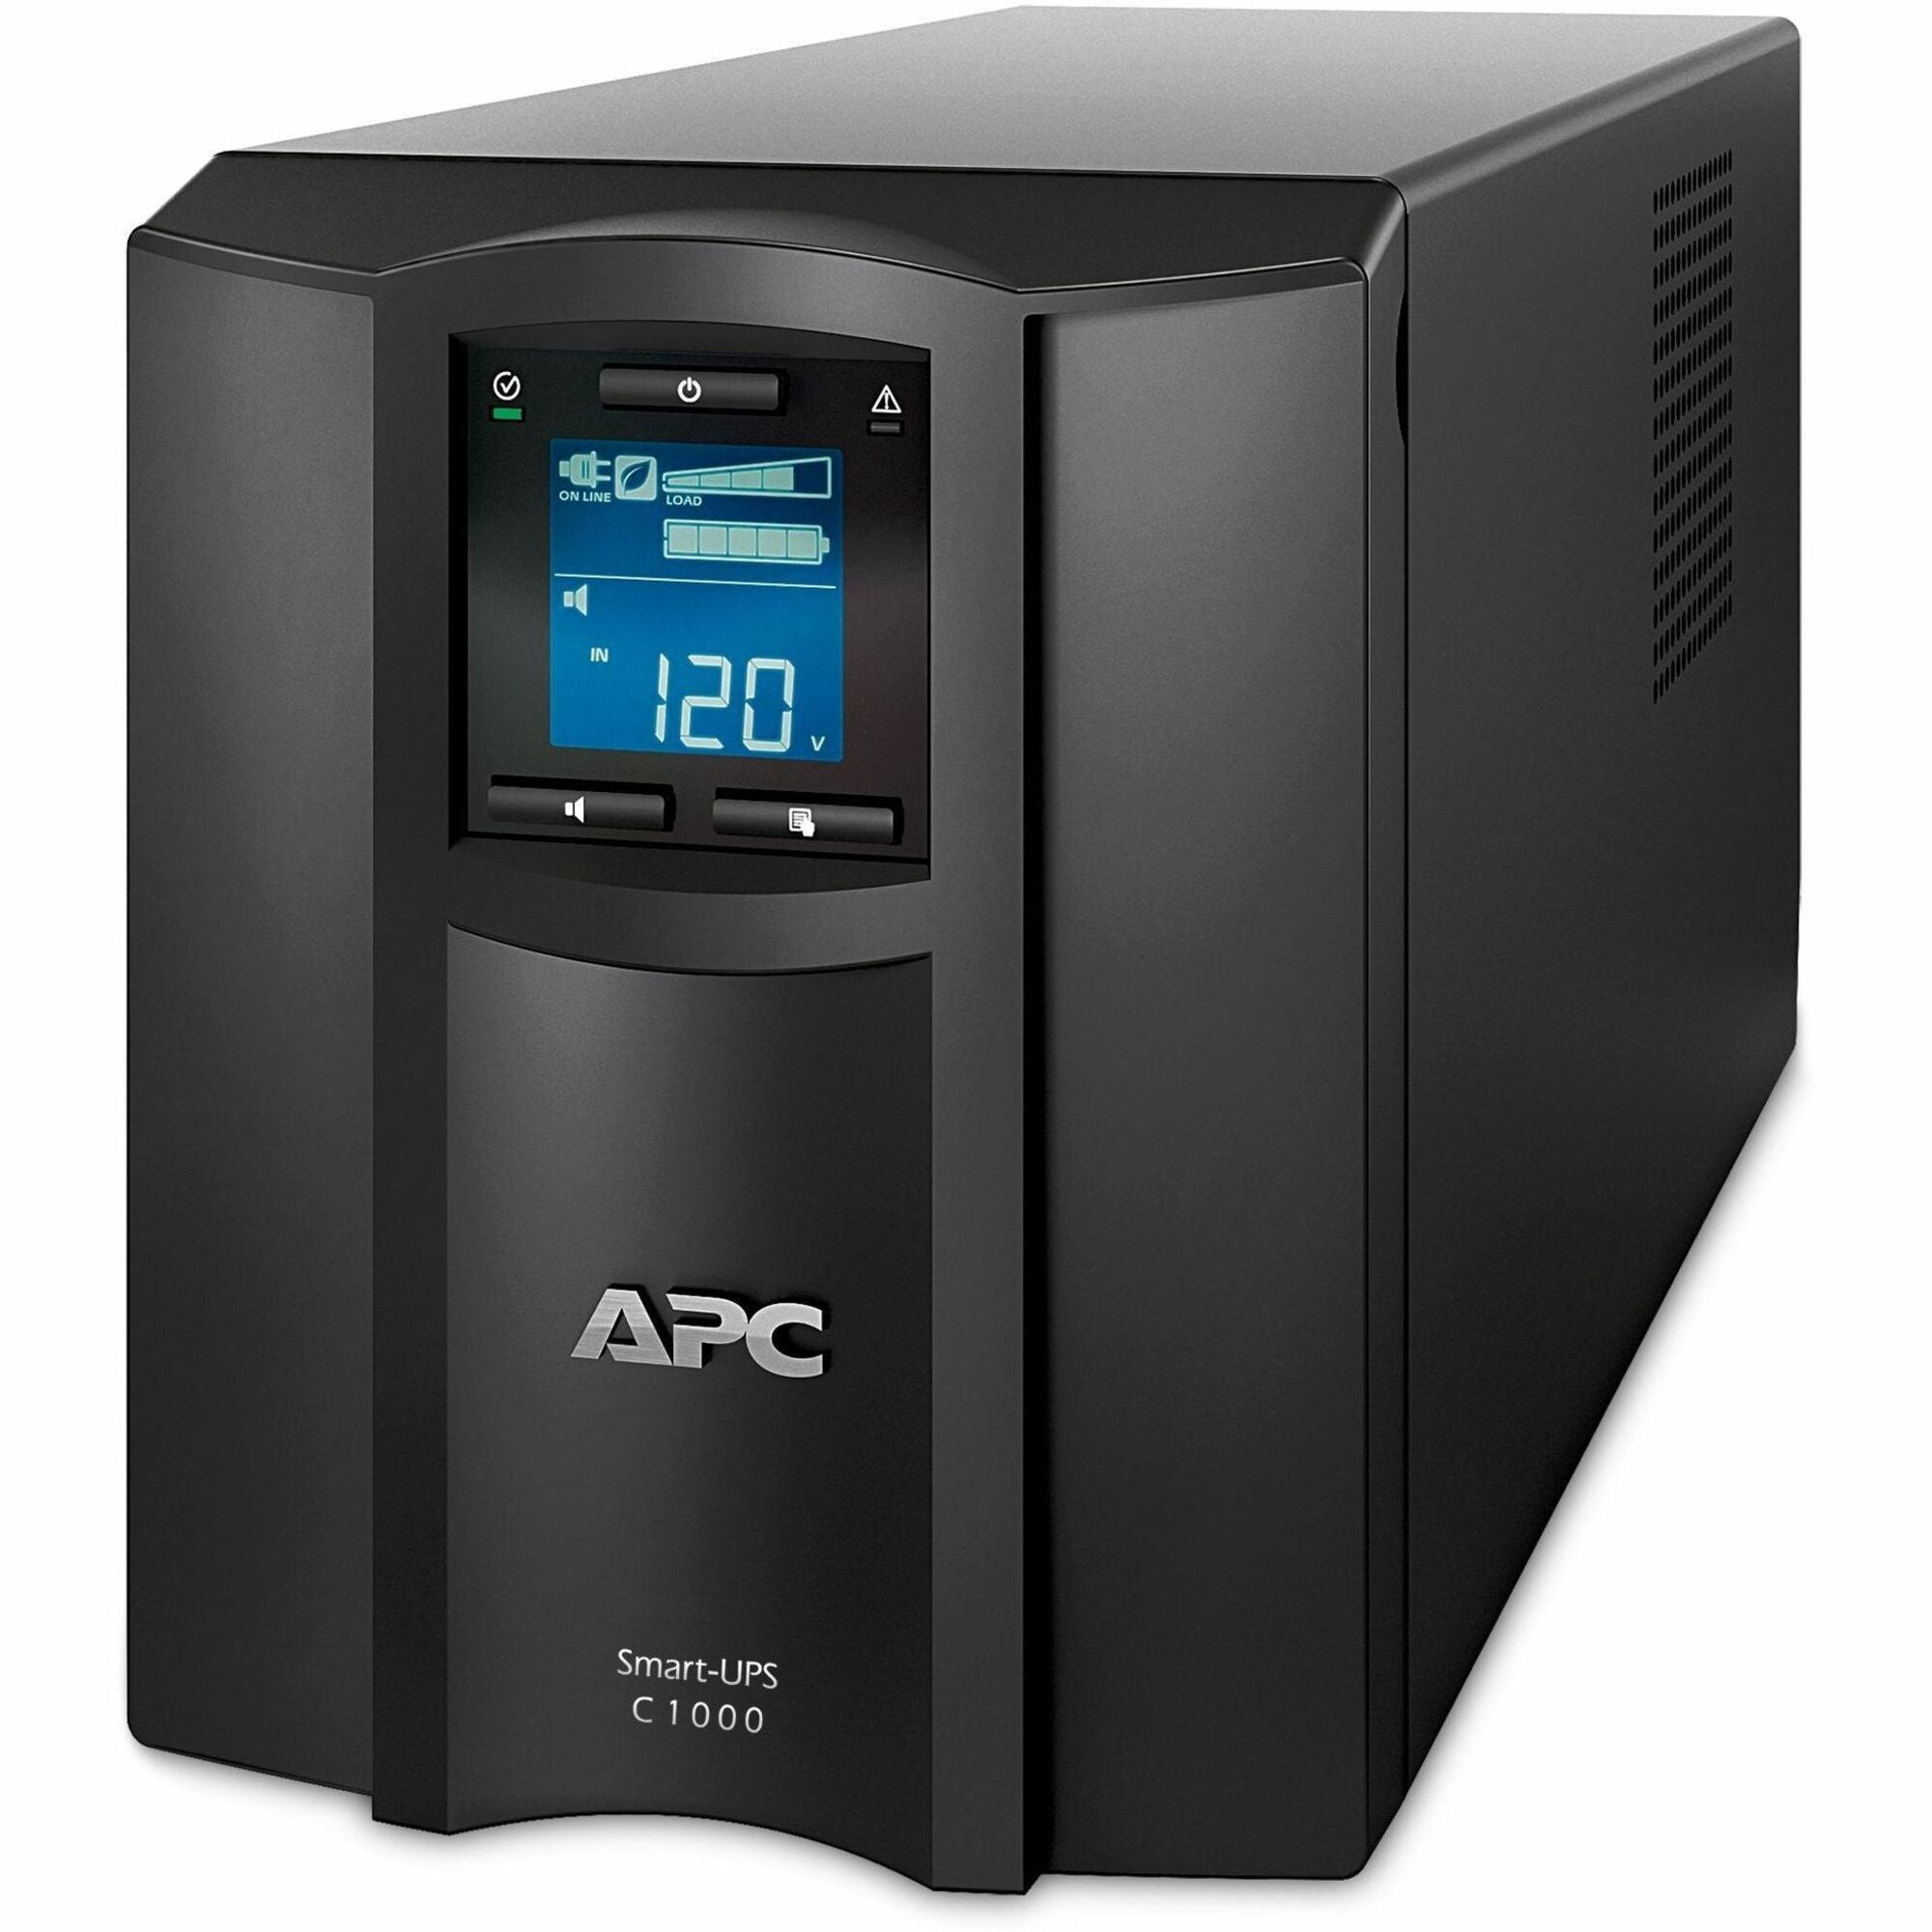 APC by Schneider Electric Smart-UPS C 1000VA LCD 120V with SmartConnect - SMC1000C